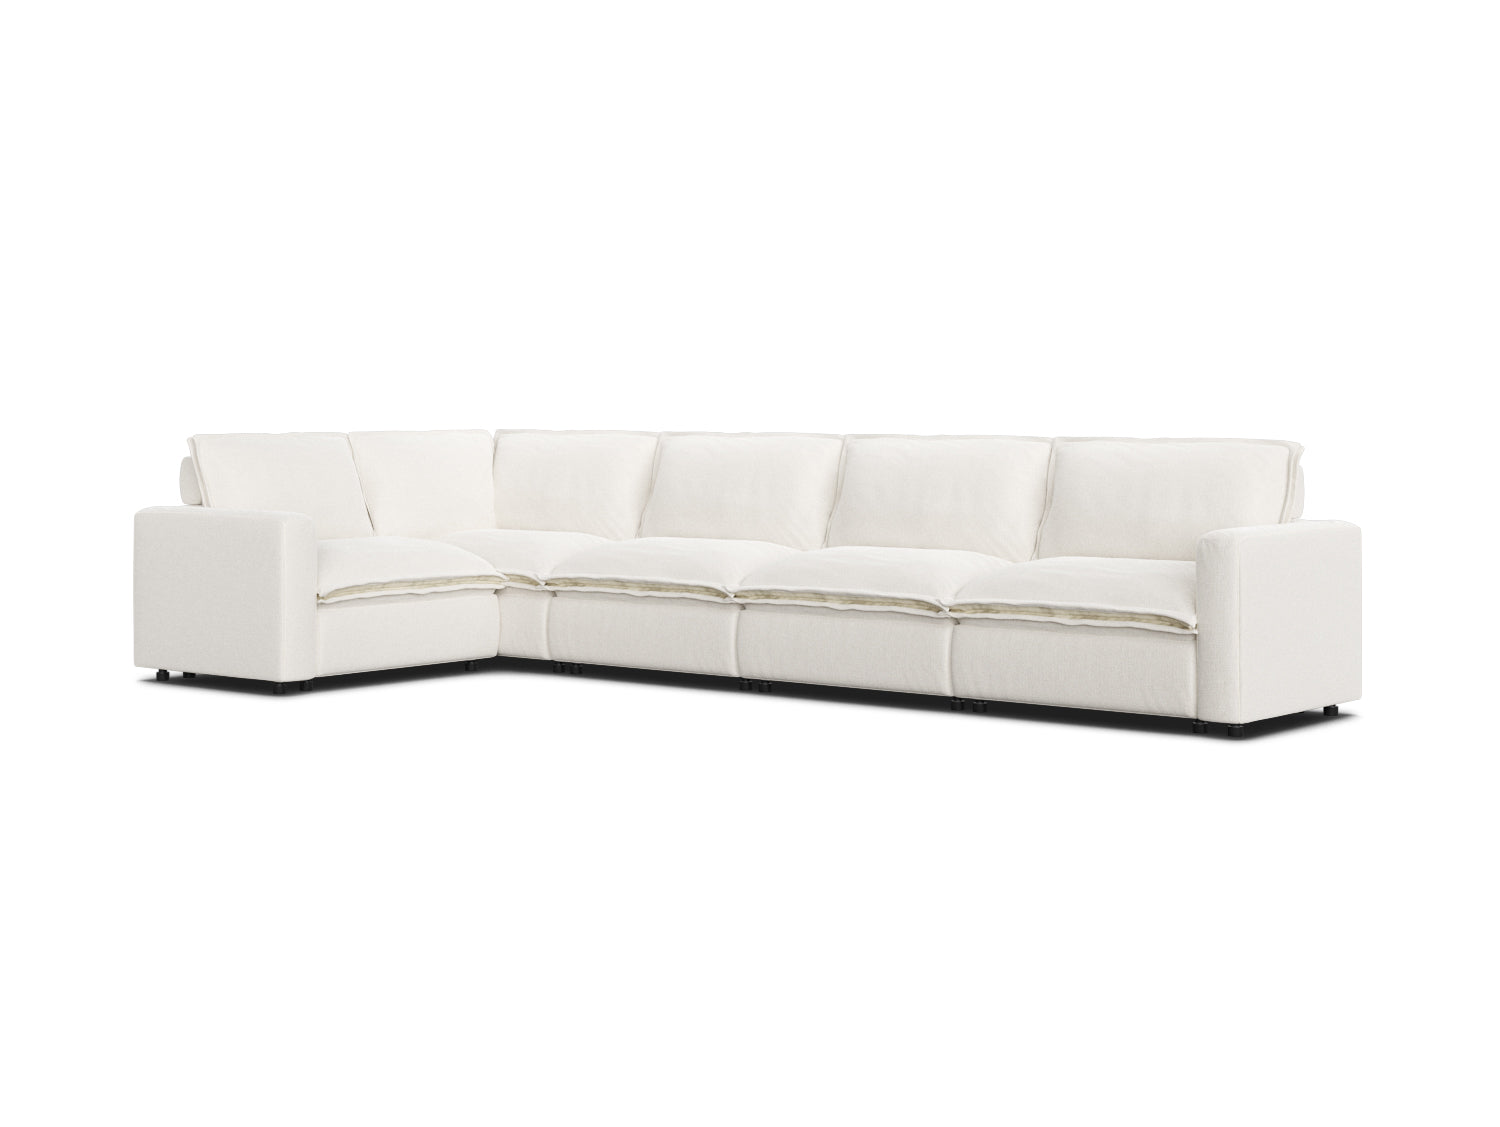 An L-shaped sectional sofa forms the shape of the letter 'L' with its sections.